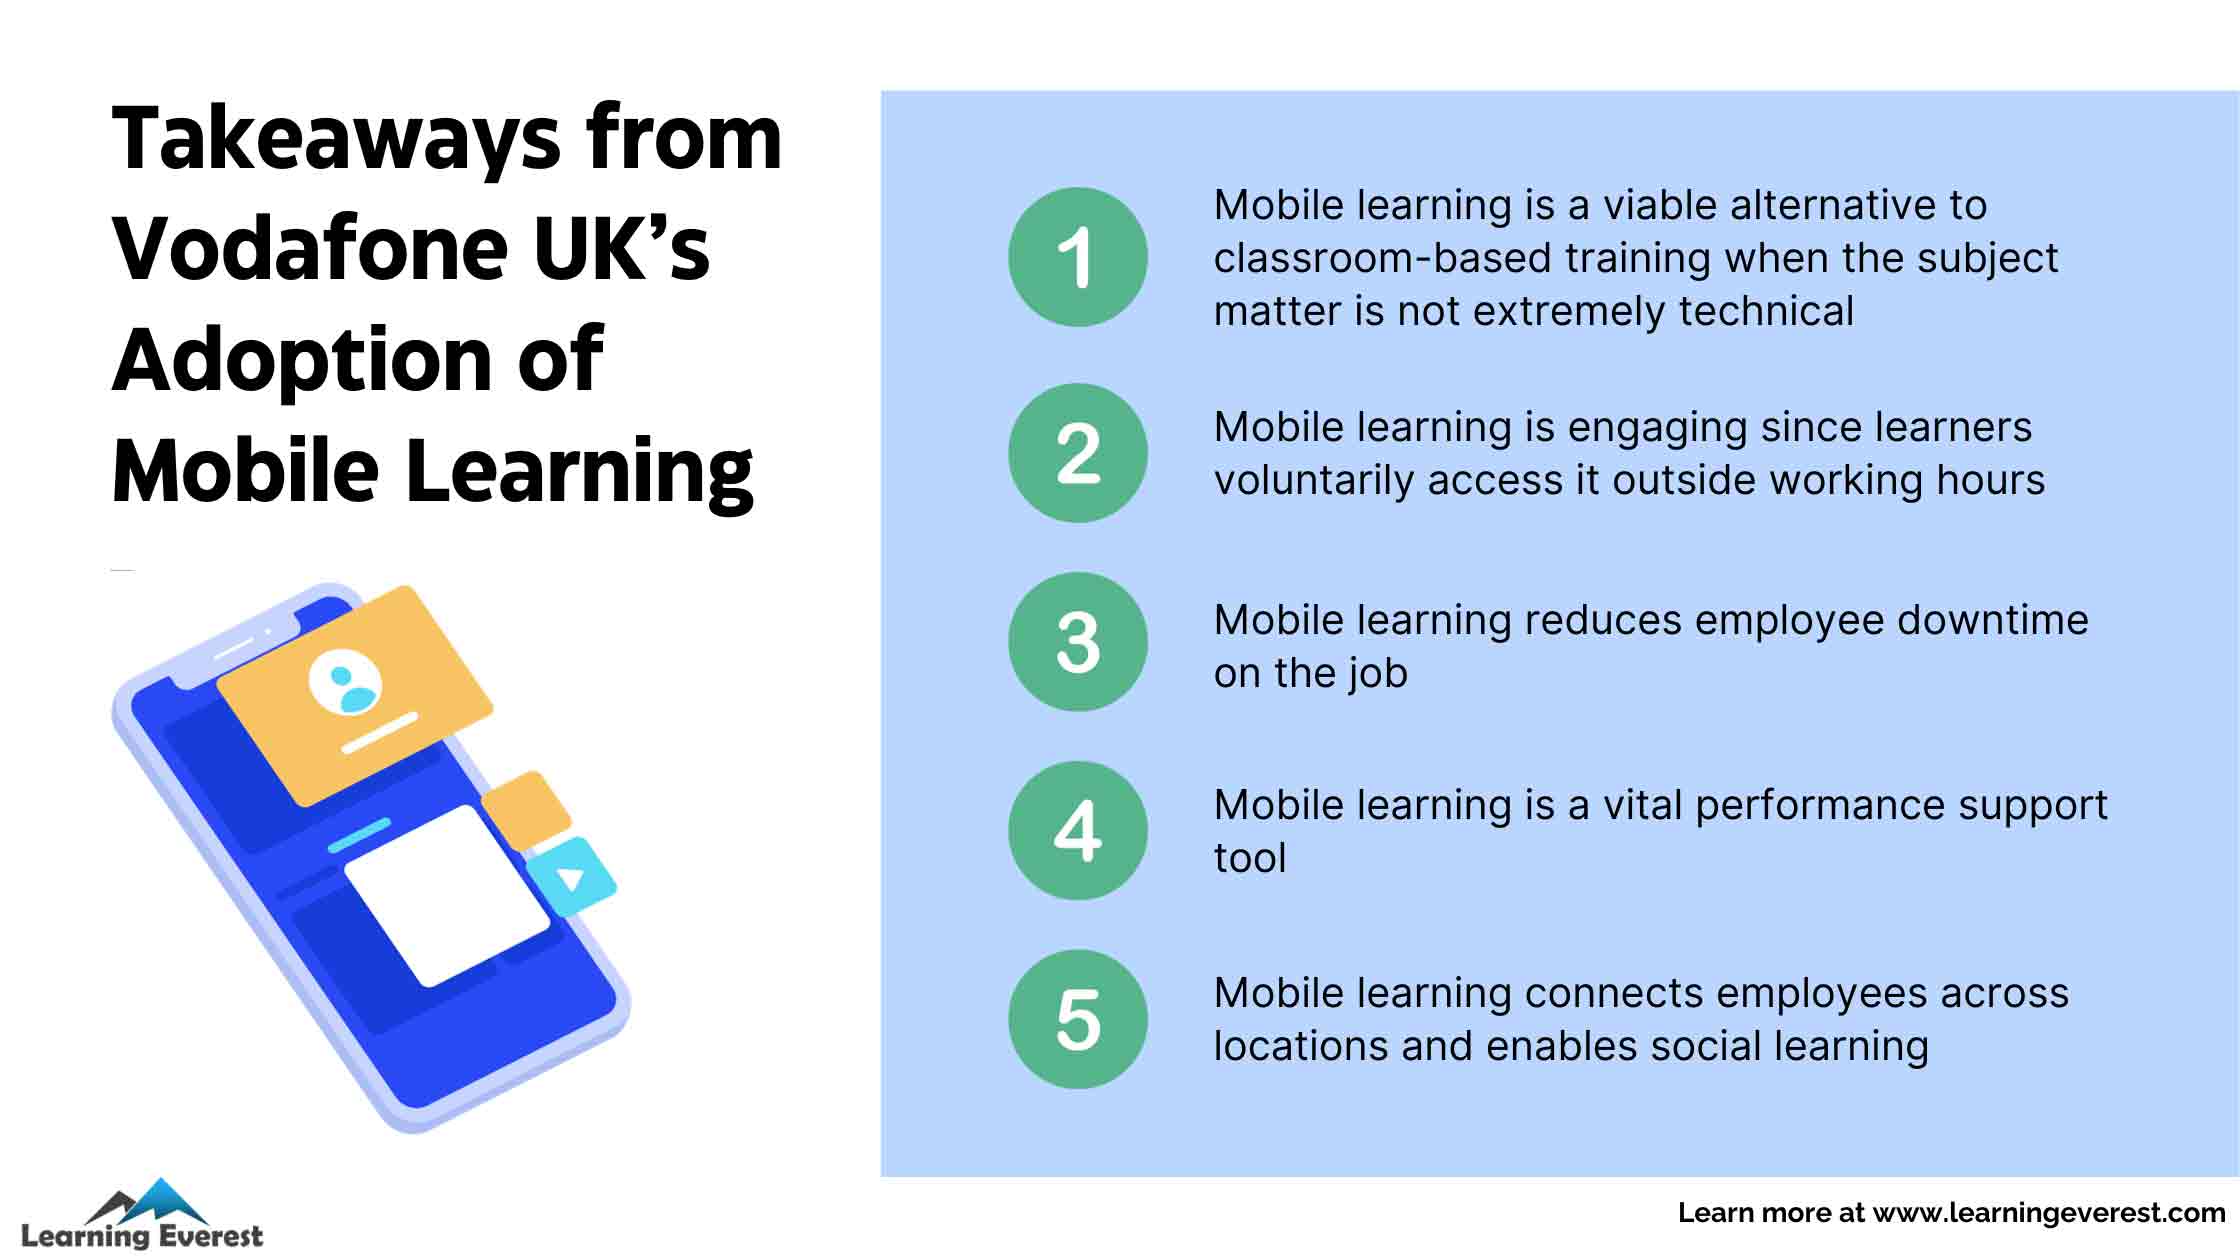 Mobile Learning for Innovation - Takeaways from Vodafone UK’s Adoption of Mobile Learning